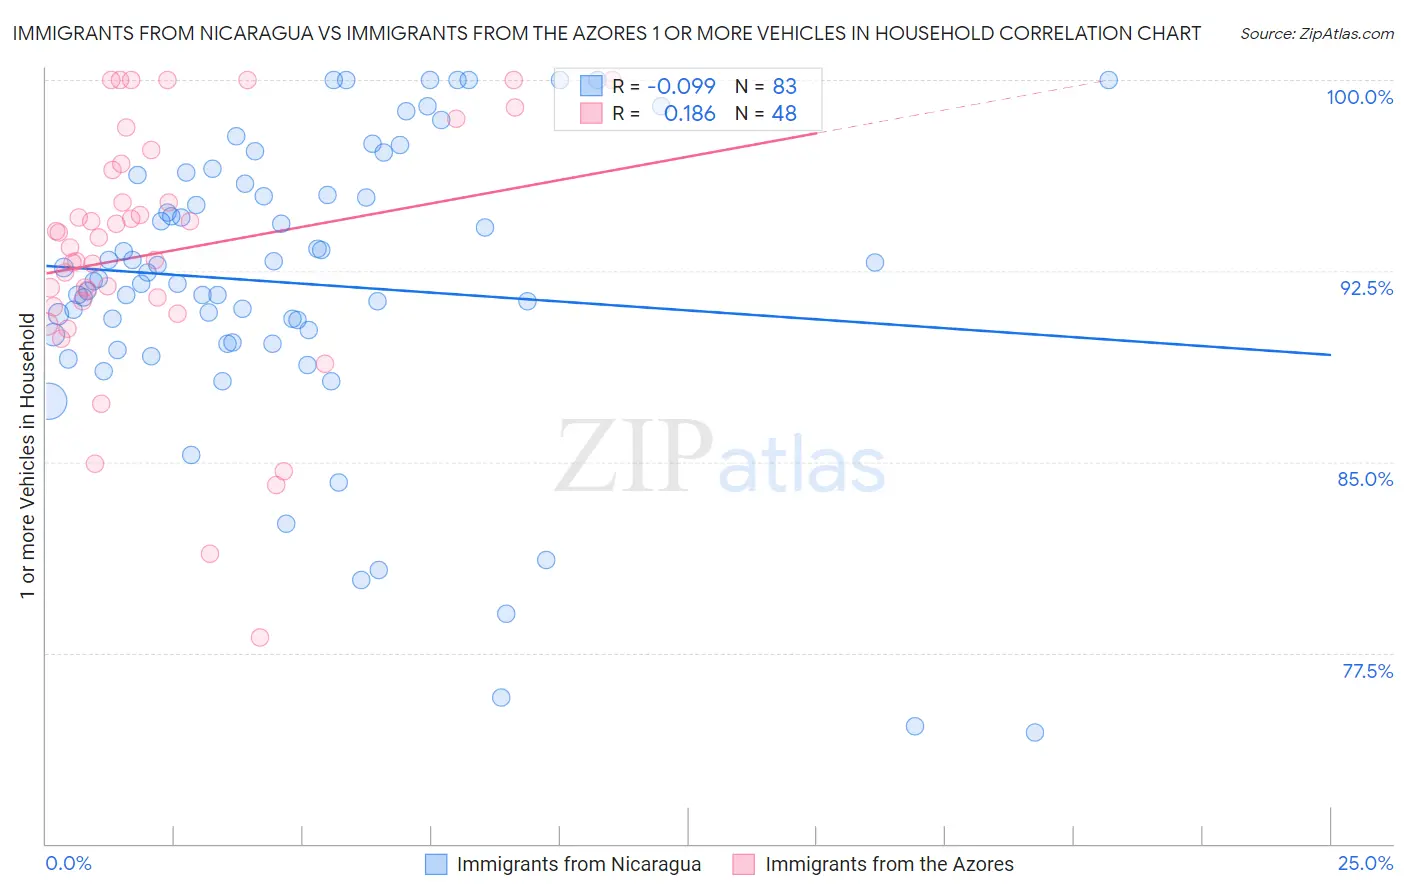 Immigrants from Nicaragua vs Immigrants from the Azores 1 or more Vehicles in Household